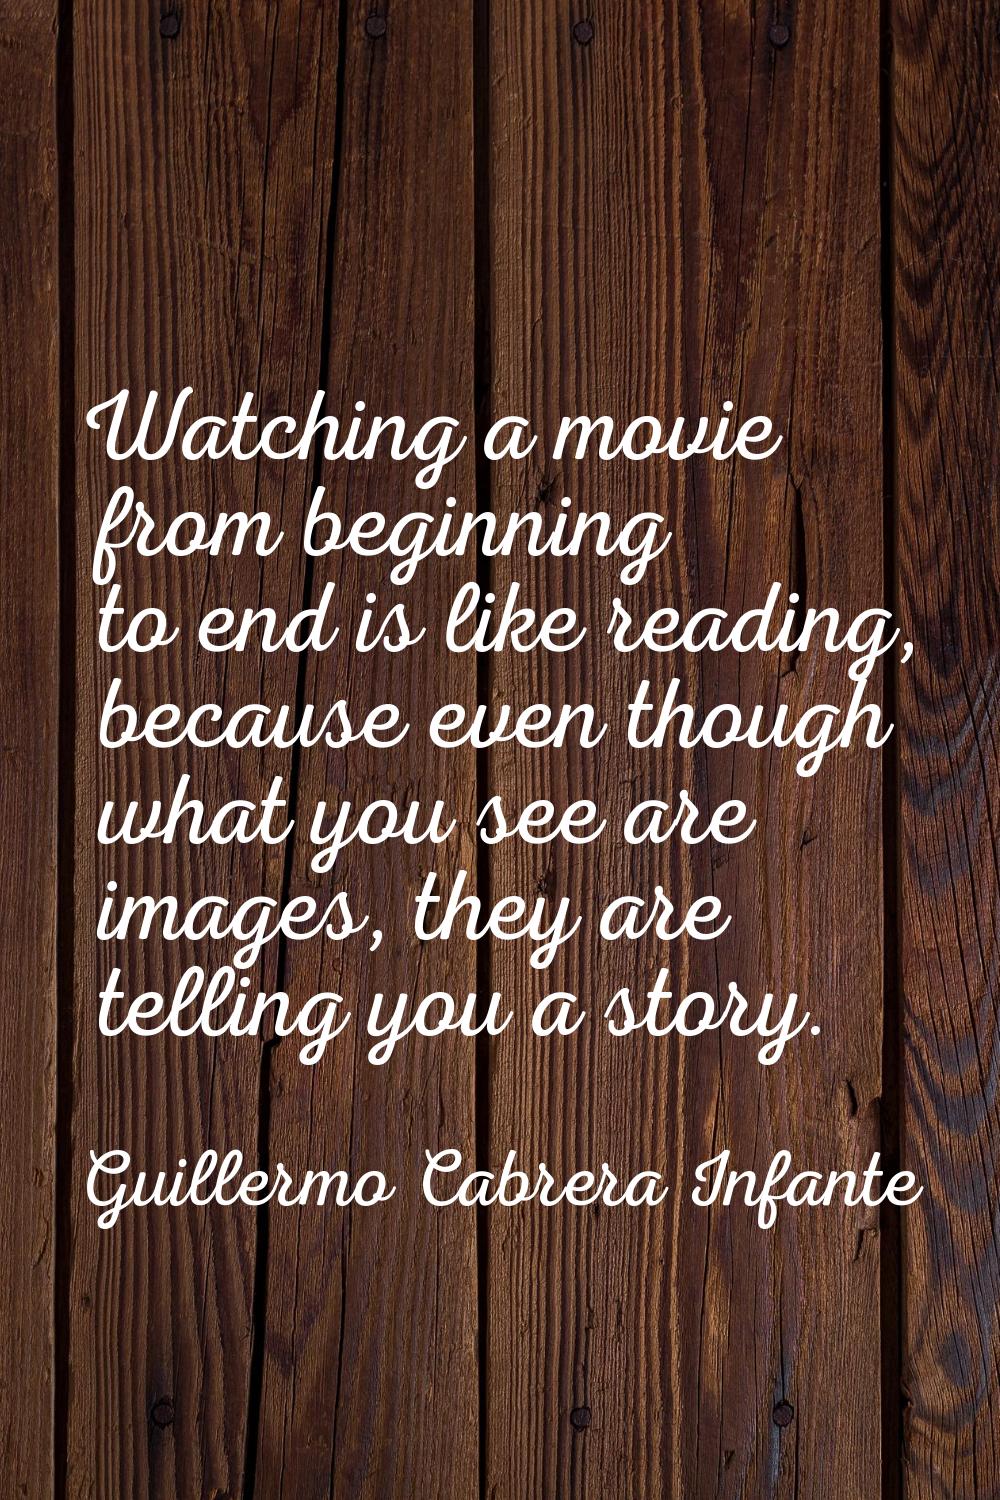 Watching a movie from beginning to end is like reading, because even though what you see are images